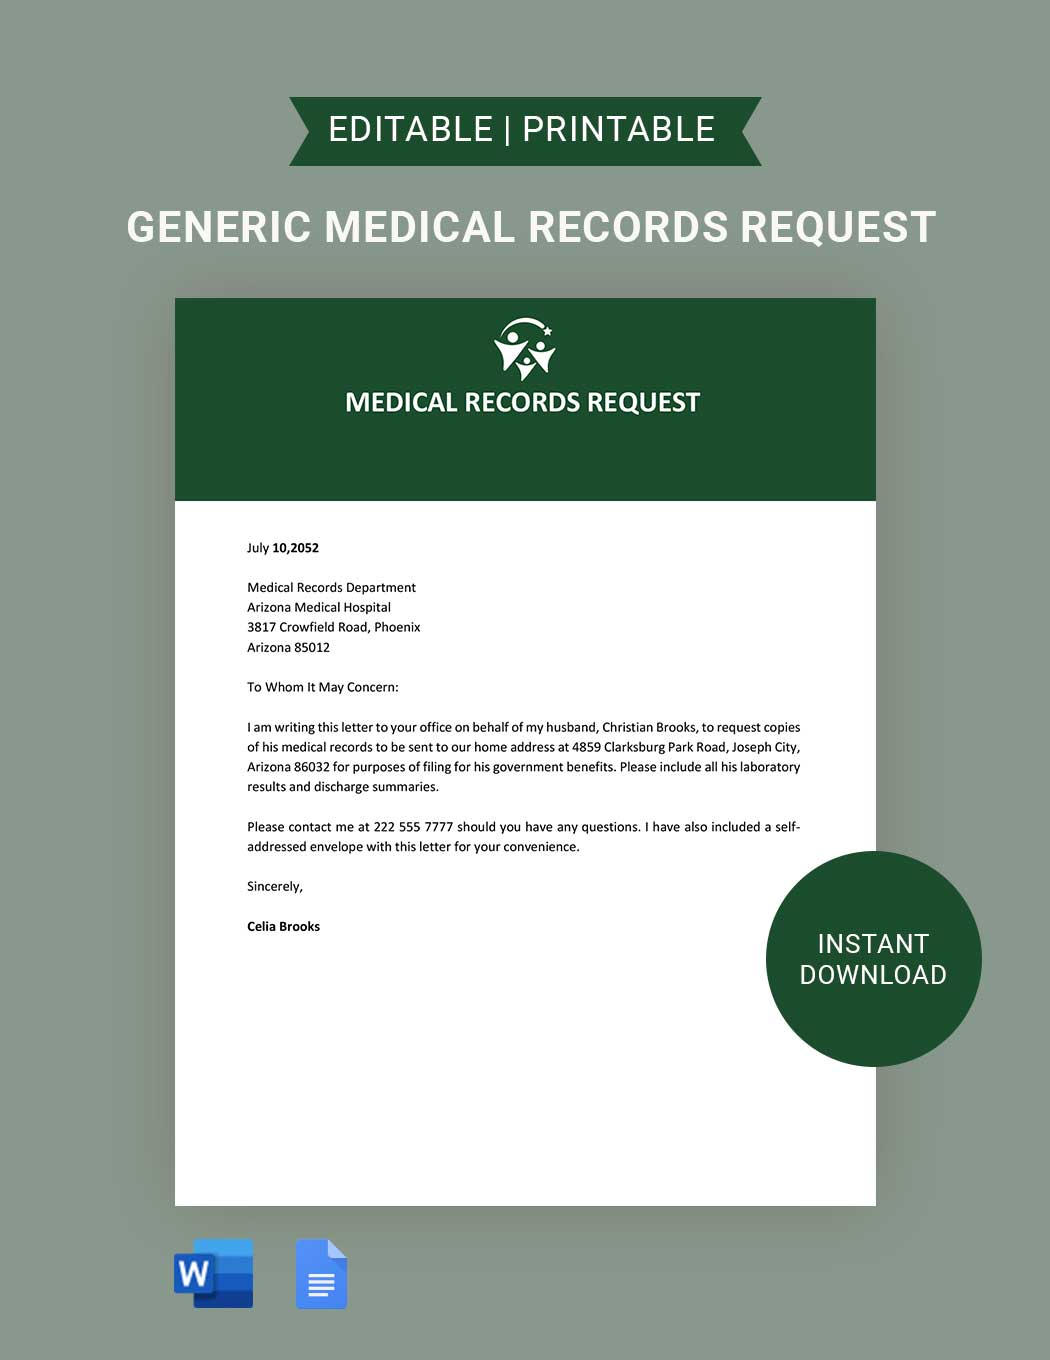 Generic Medical Records Request Example